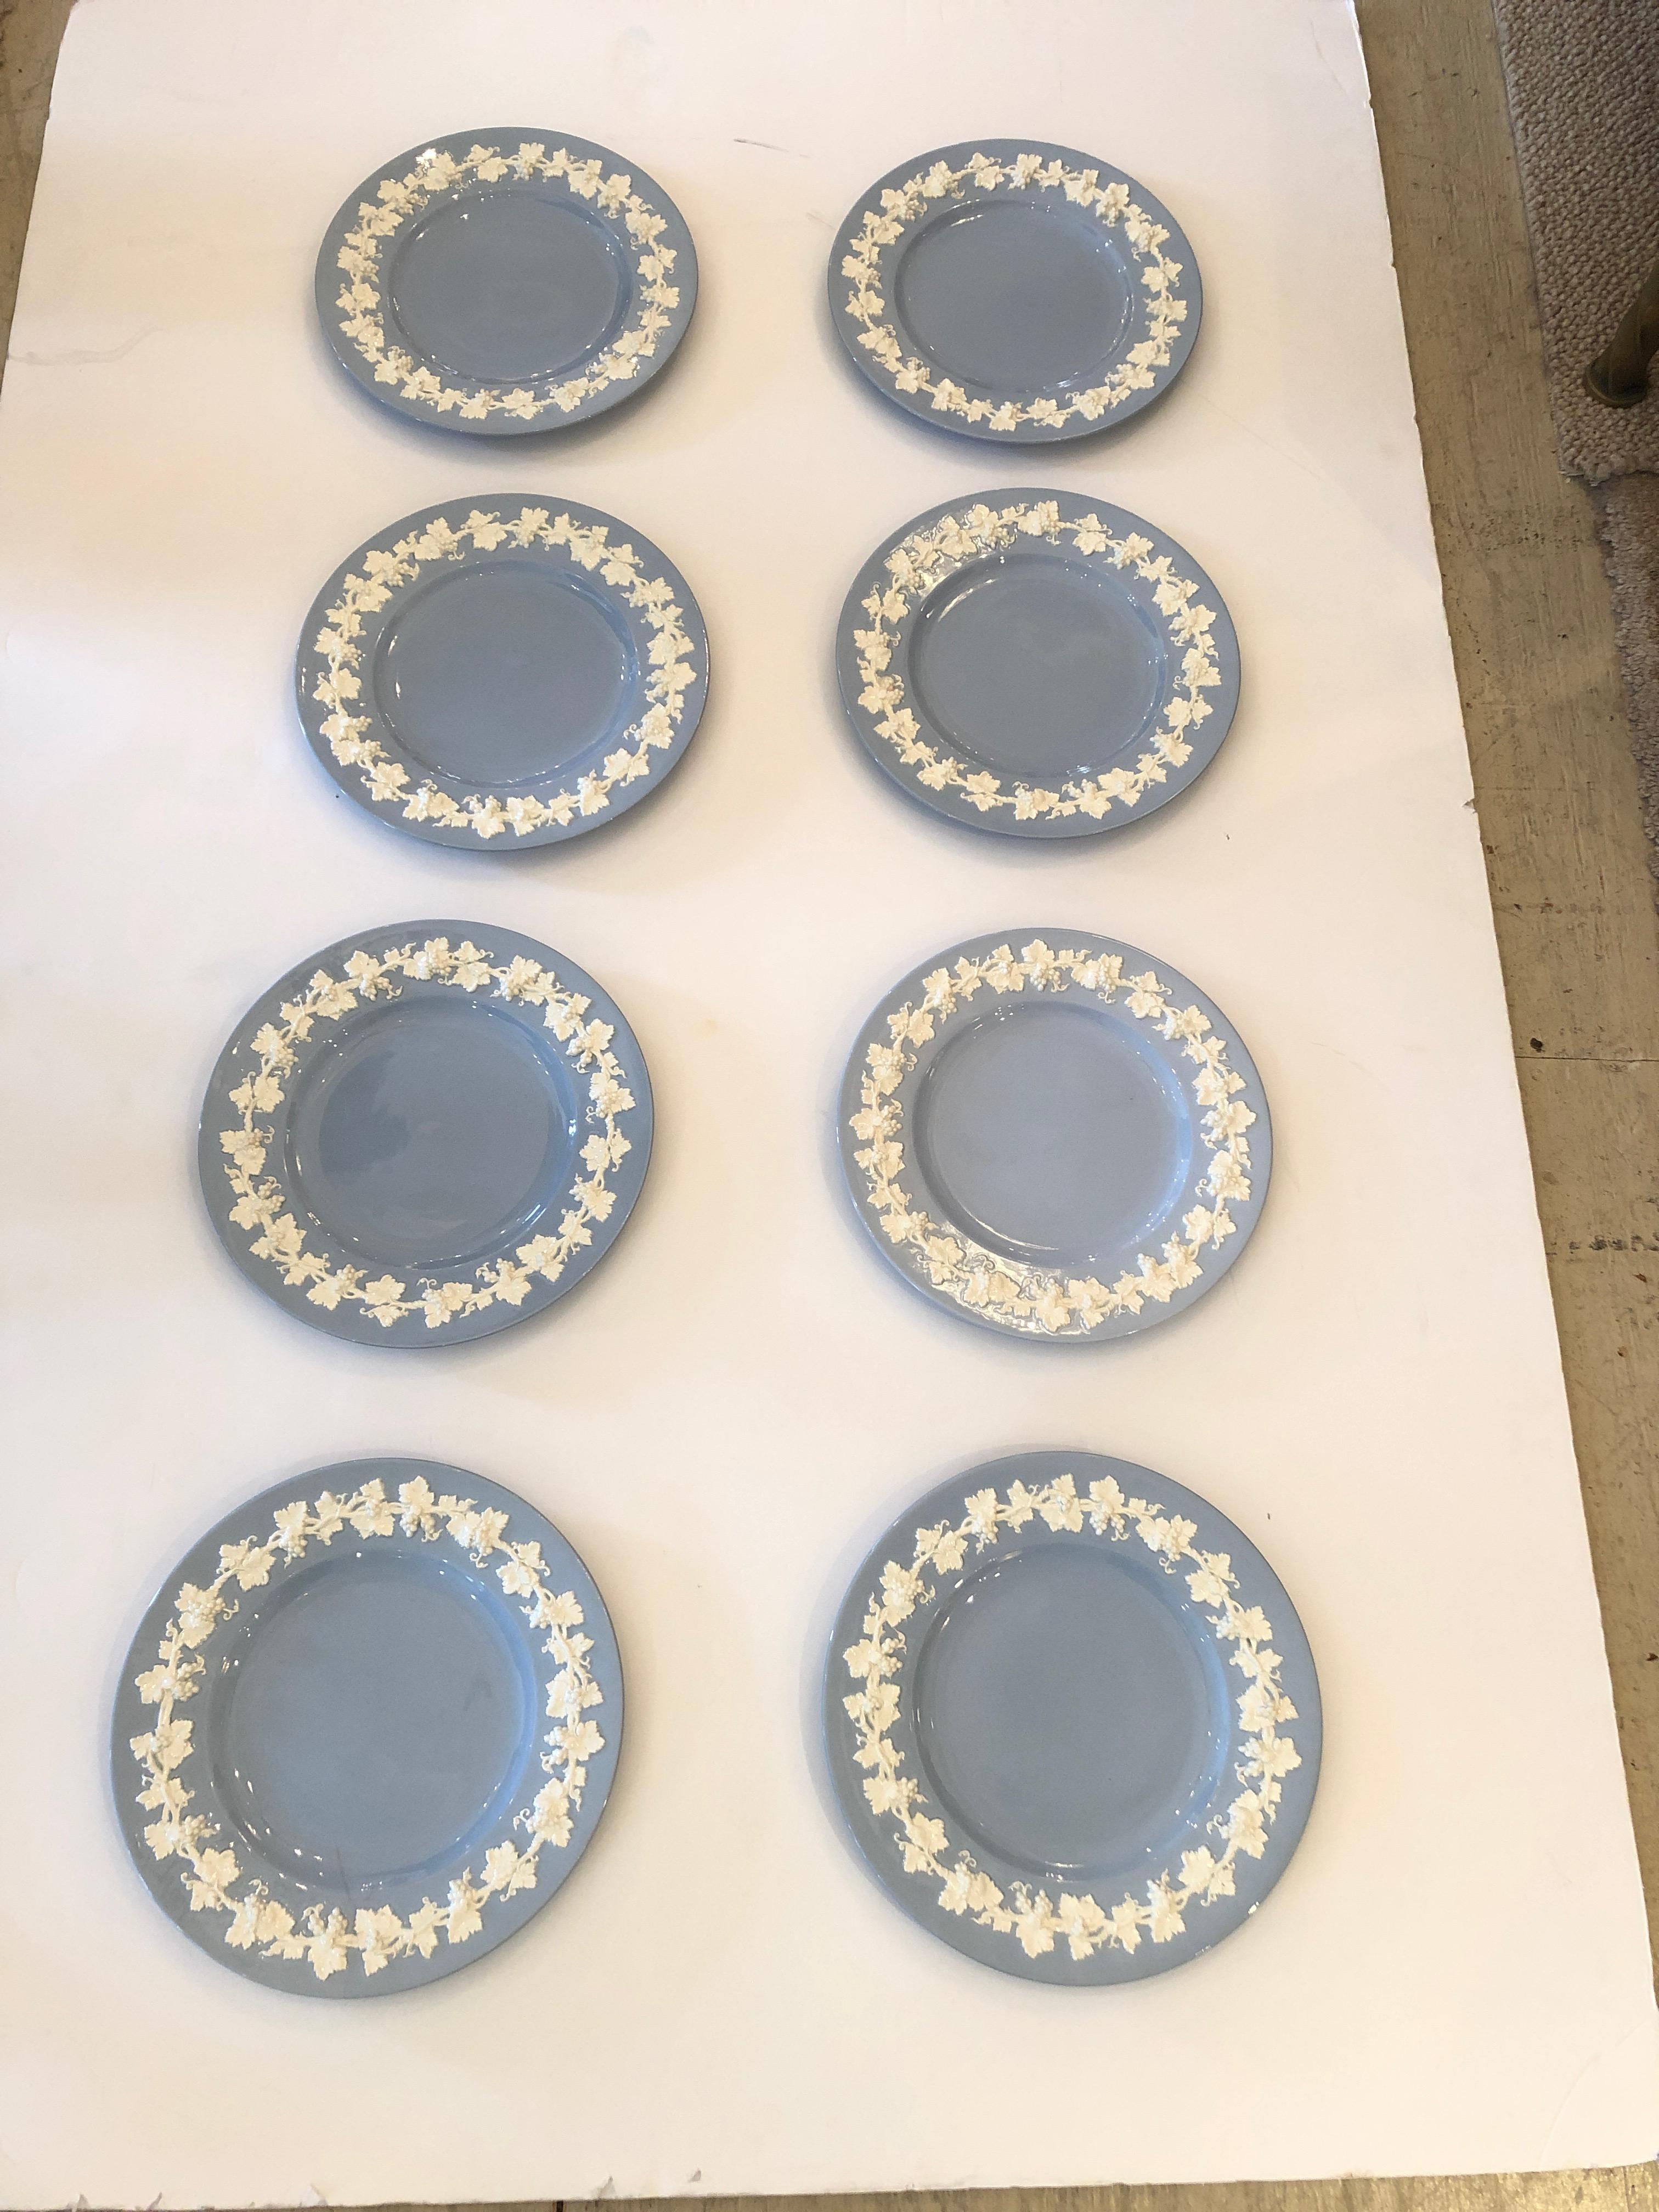 A pretty set of 8 Wedgewood dinner plates in a gorgeous shade of lavender blue having raised cream floral decoration around the periphery. Stamped on back with Queen Ware pattern 2788 Wedgewood England.